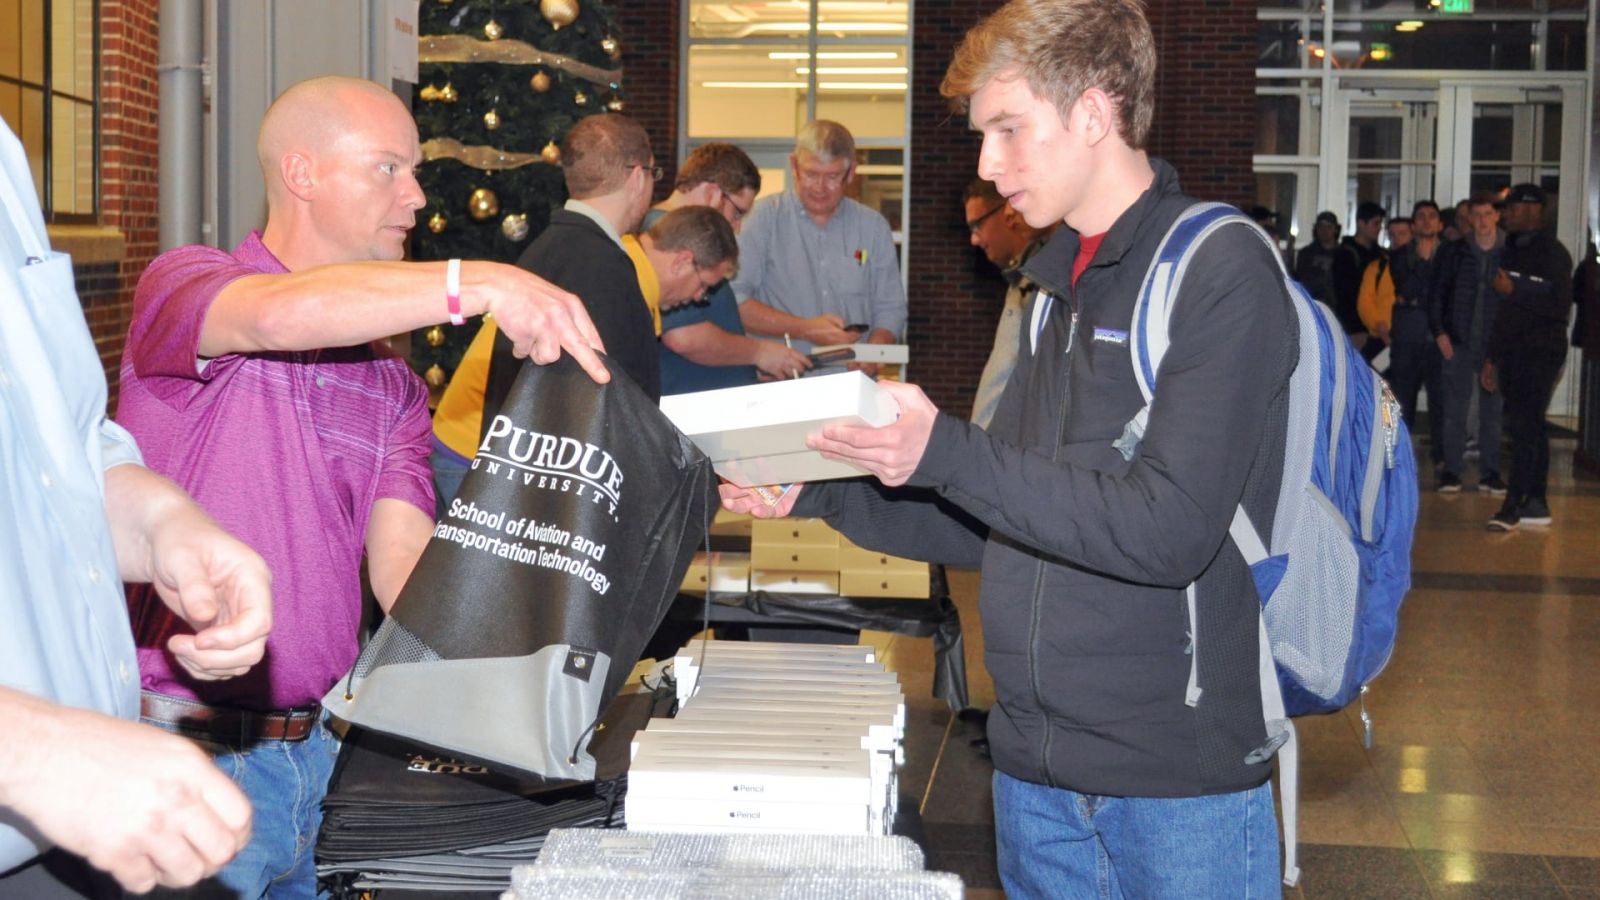 Purdue staff members distribute new Electronic Purdue Bags, each with iPad, Apple Pencil & Logitech keyboards, to students in the School of Aviation and Transportation Technology